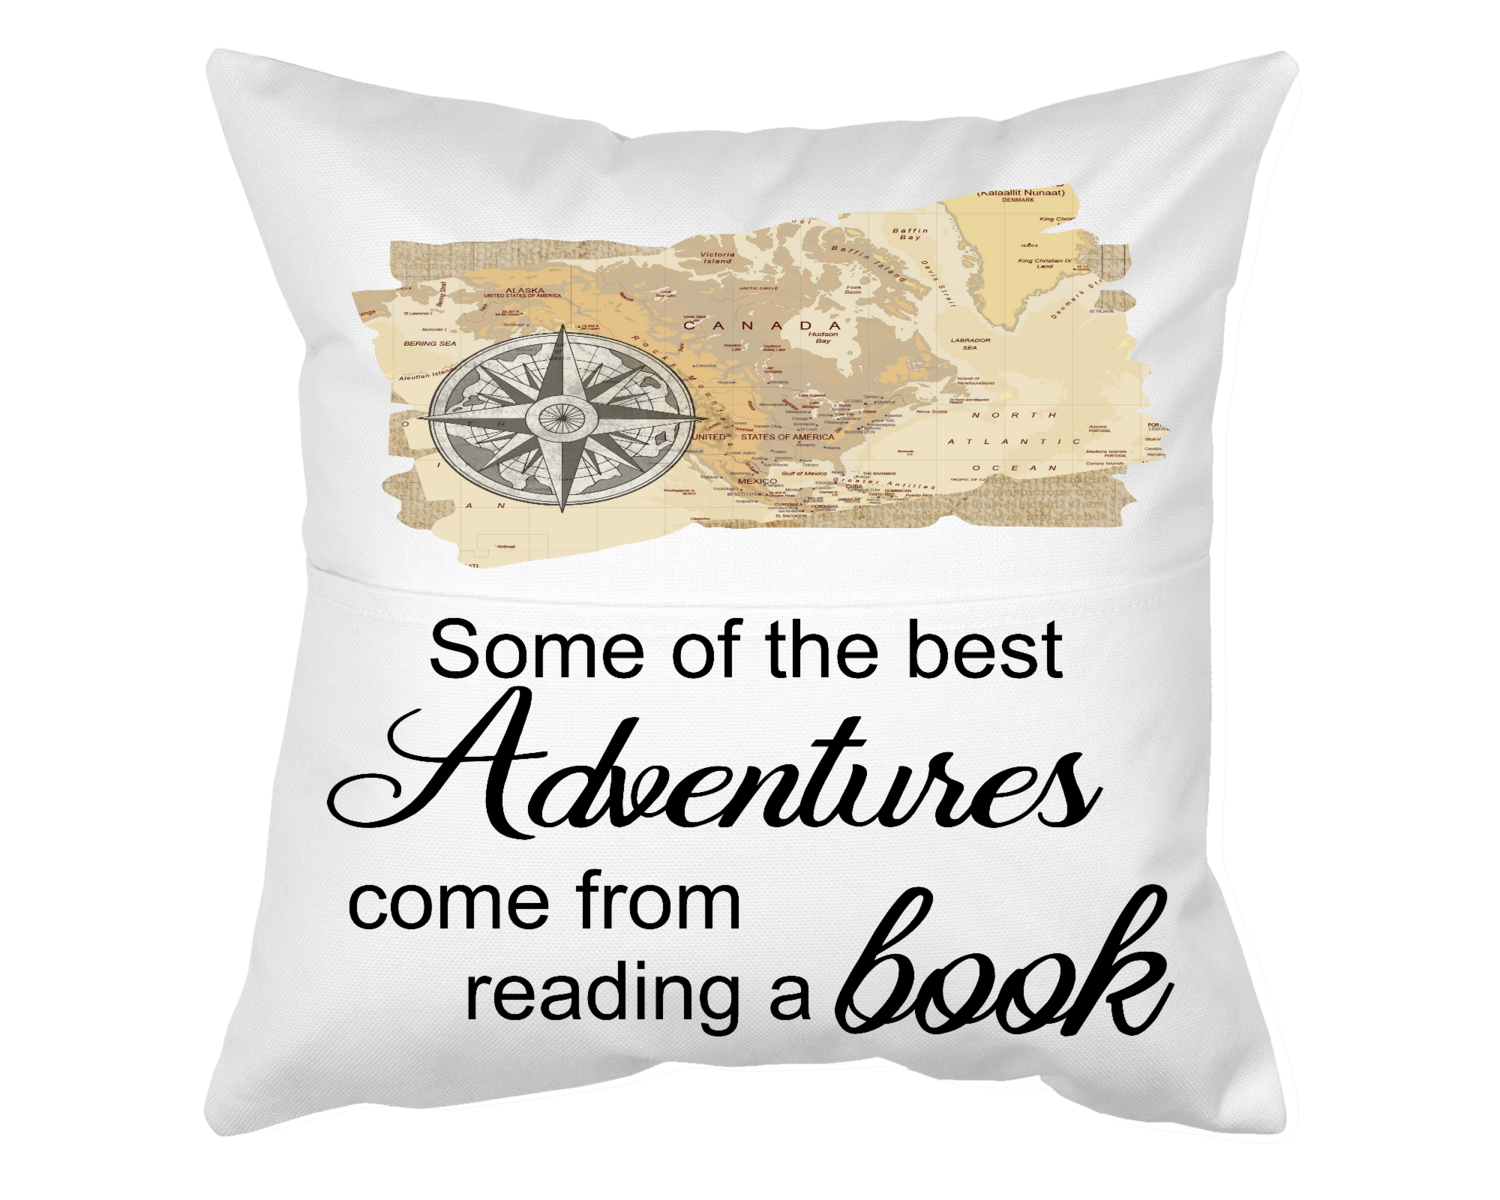 Pillow With Pocket: SOME OF THE BEST ADVENTURES COME FROM READING A BOOK